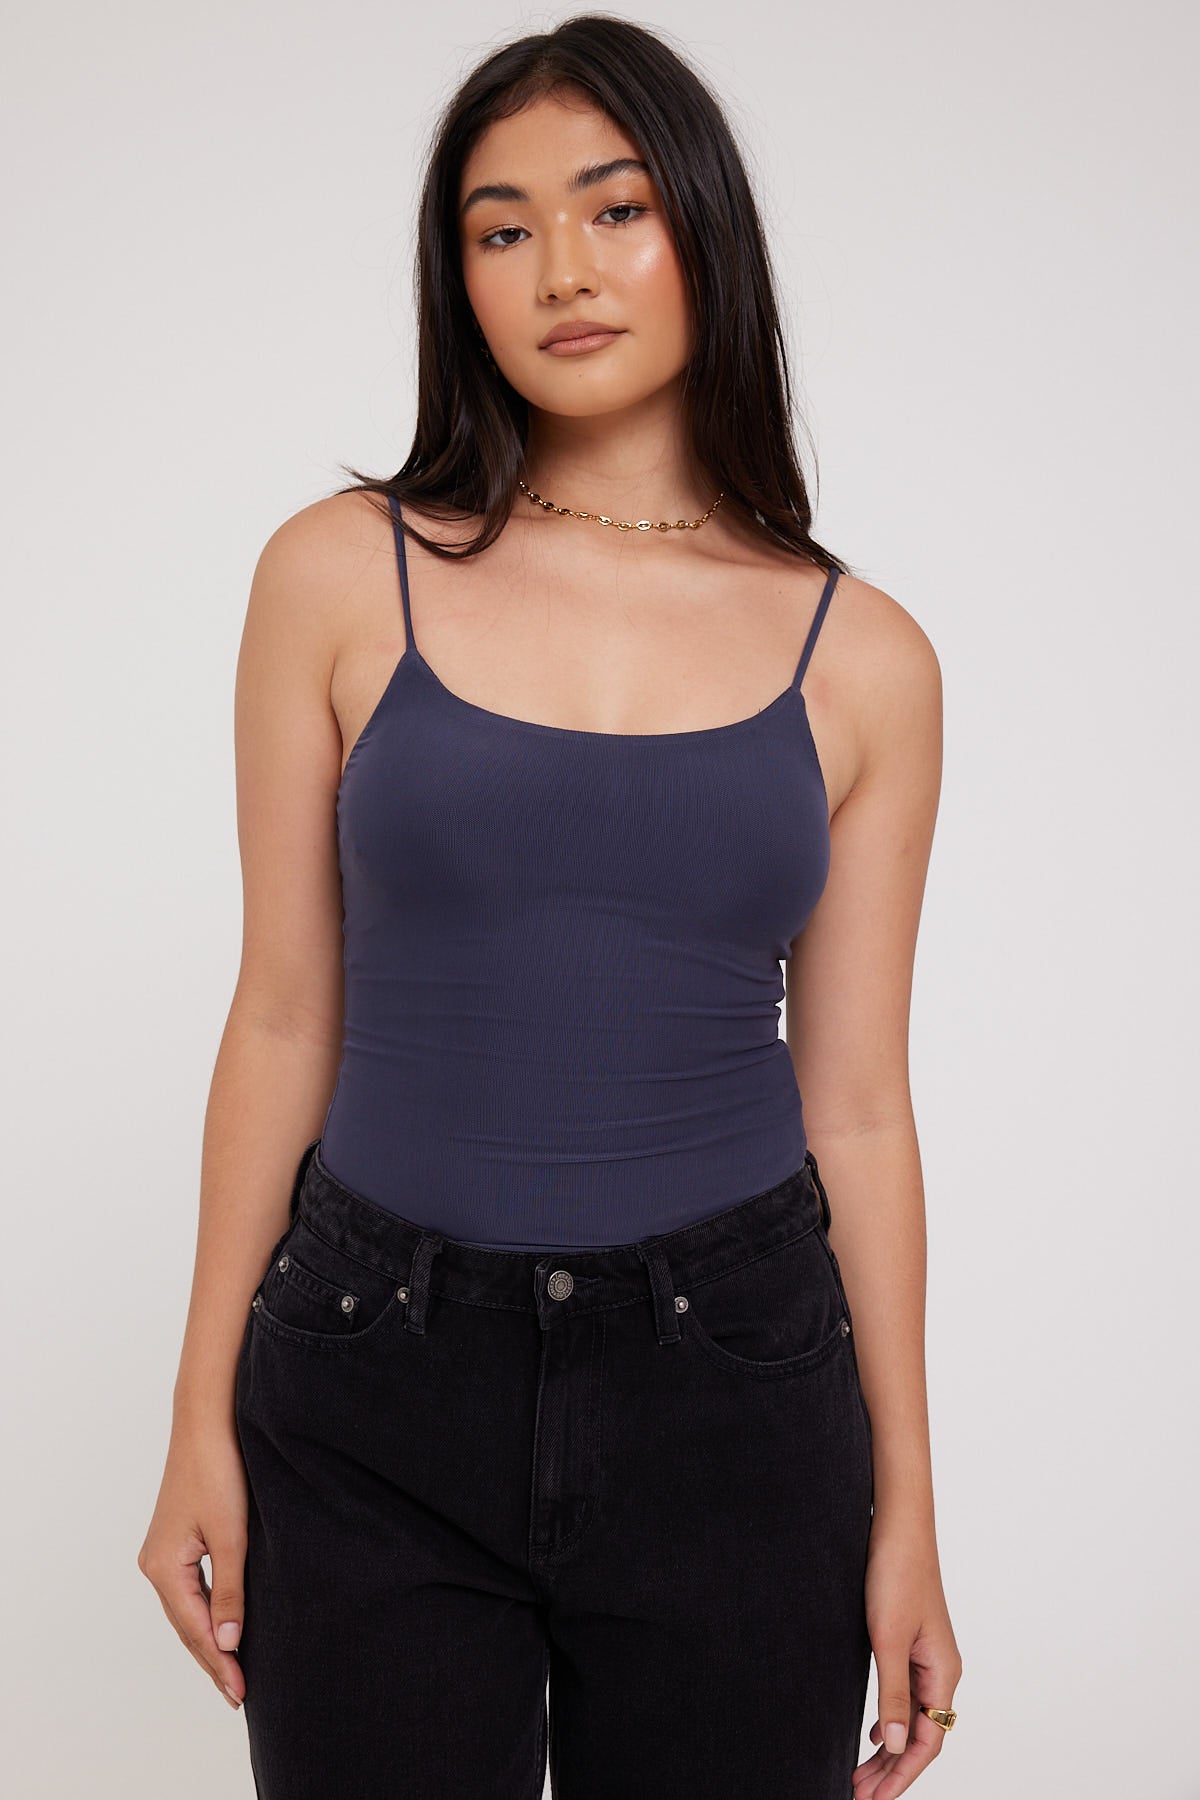 Perfect Stranger Mystery Mesh Cami Charcoal